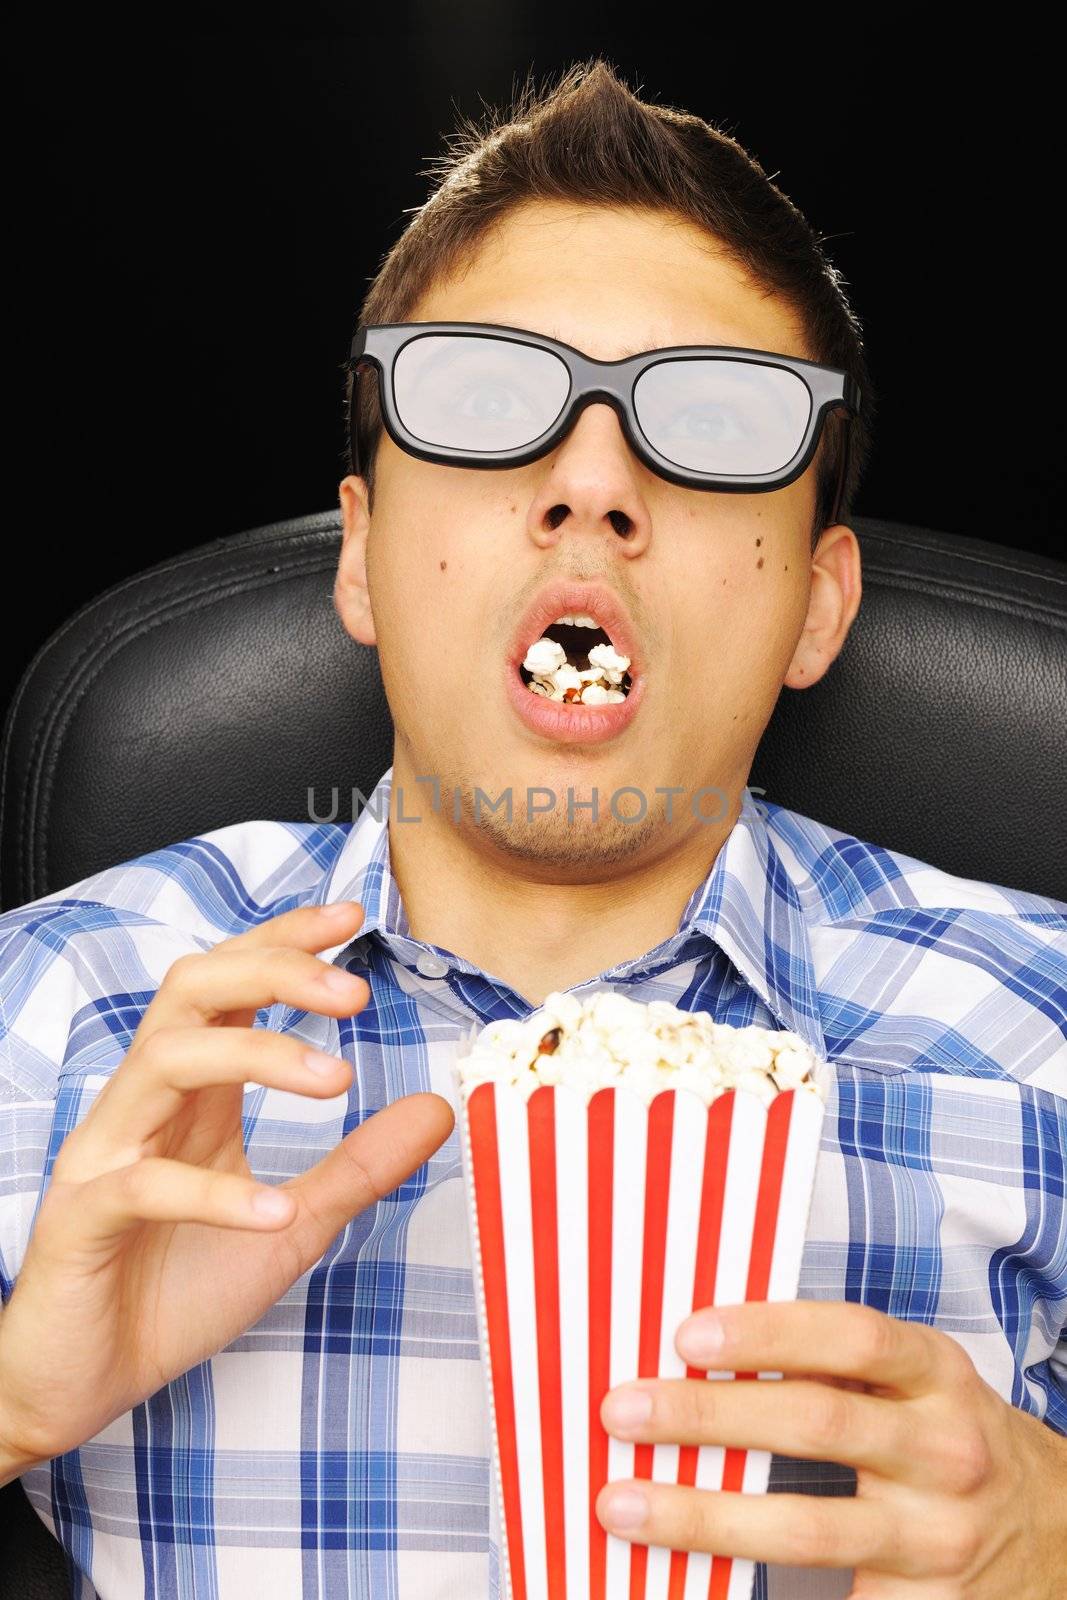 Young man watching movie in 3D glasses at cinema